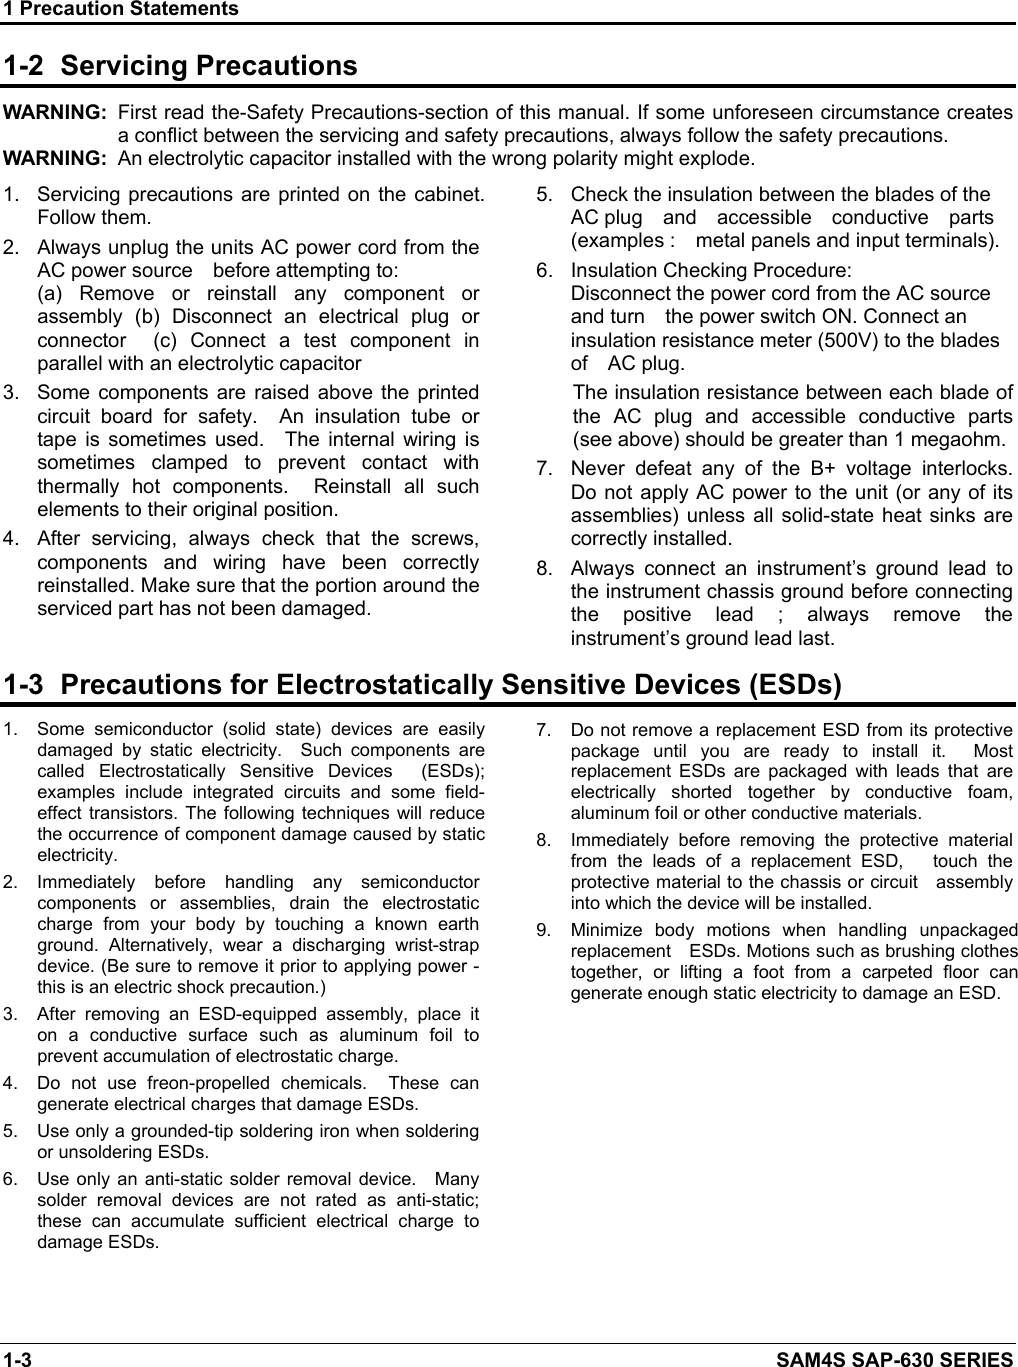 1 Precaution Statements 1-3    SAM4S SAP-630 SERIES 1-2  Servicing Precautions WARNING:  First read the-Safety Precautions-section of this manual. If some unforeseen circumstance creates a conflict between the servicing and safety precautions, always follow the safety precautions. WARNING:  An electrolytic capacitor installed with the wrong polarity might explode. 1.  Servicing  precautions are printed  on  the cabinet.   Follow them. 2.  Always unplug the units AC power cord from the AC power source    before attempting to:     (a)  Remove  or  reinstall  any  component  or assembly  (b)  Disconnect  an  electrical  plug  or connector    (c)  Connect  a  test  component  in parallel with an electrolytic capacitor 3.  Some  components  are  raised  above  the  printed circuit  board  for  safety.    An  insulation  tube  or tape  is  sometimes  used.    The  internal  wiring  is sometimes  clamped  to  prevent  contact  with thermally  hot  components.    Reinstall  all  such elements to their original position. 4.  After  servicing,  always  check  that  the  screws, components  and  wiring  have  been  correctly reinstalled. Make sure that the portion around the serviced part has not been damaged. 5.  Check the insulation between the blades of the   AC plug    and    accessible    conductive    parts   (examples :    metal panels and input terminals). 6.  Insulation Checking Procedure:                Disconnect the power cord from the AC source and turn    the power switch ON. Connect an insulation resistance meter (500V) to the blades of    AC plug. The insulation resistance between each blade of the  AC  plug  and  accessible  conductive  parts (see above) should be greater than 1 megaohm. 7.  Never  defeat  any  of  the  B+  voltage  interlocks.         Do not apply AC power to the unit (or any of its assemblies) unless all solid-state  heat  sinks are correctly installed. 8.  Always  connect  an  instrument’s  ground  lead  to the instrument chassis ground before connecting the  positive  lead  ;  always  remove  the instrument’s ground lead last.1-3  Precautions for Electrostatically Sensitive Devices (ESDs) 1.  Some  semiconductor  (solid  state)  devices  are  easily damaged  by  static  electricity.    Such  components  are called  Electrostatically  Sensitive  Devices    (ESDs); examples  include  integrated  circuits  and  some  field-effect  transistors. The following  techniques  will  reduce the occurrence of component damage caused by static electricity. 2.  Immediately  before  handling  any  semiconductor components  or  assemblies,  drain  the  electrostatic charge  from  your  body  by  touching  a  known  earth ground.  Alternatively,  wear  a  discharging  wrist-strap device. (Be sure to remove it prior to applying power - this is an electric shock precaution.) 3.  After  removing  an  ESD-equipped  assembly,  place  it on  a  conductive  surface  such  as  aluminum  foil  to prevent accumulation of electrostatic charge. 4.  Do  not  use  freon-propelled  chemicals.    These  can generate electrical charges that damage ESDs. 5.  Use only a grounded-tip soldering iron when soldering or unsoldering ESDs. 6.  Use only an anti-static solder removal  device.    Many solder  removal  devices  are  not  rated  as  anti-static; these  can  accumulate  sufficient  electrical  charge  to damage ESDs.   7.  Do not remove a replacement ESD from its protective package  until  you  are  ready  to  install  it.    Most replacement  ESDs  are  packaged  with  leads  that  are electrically  shorted  together  by  conductive  foam, aluminum foil or other conductive materials. 8.  Immediately  before  removing  the  protective  material from the leads of a replacement ESD,   touch the protective material to the chassis or circuit    assembly into which the device will be installed. 9.  Minimize  body  motions  when  handling  unpackaged replacement    ESDs. Motions such as brushing clothes together,  or  lifting  a  foot  from  a  carpeted  floor  can generate enough static electricity to damage an ESD.    